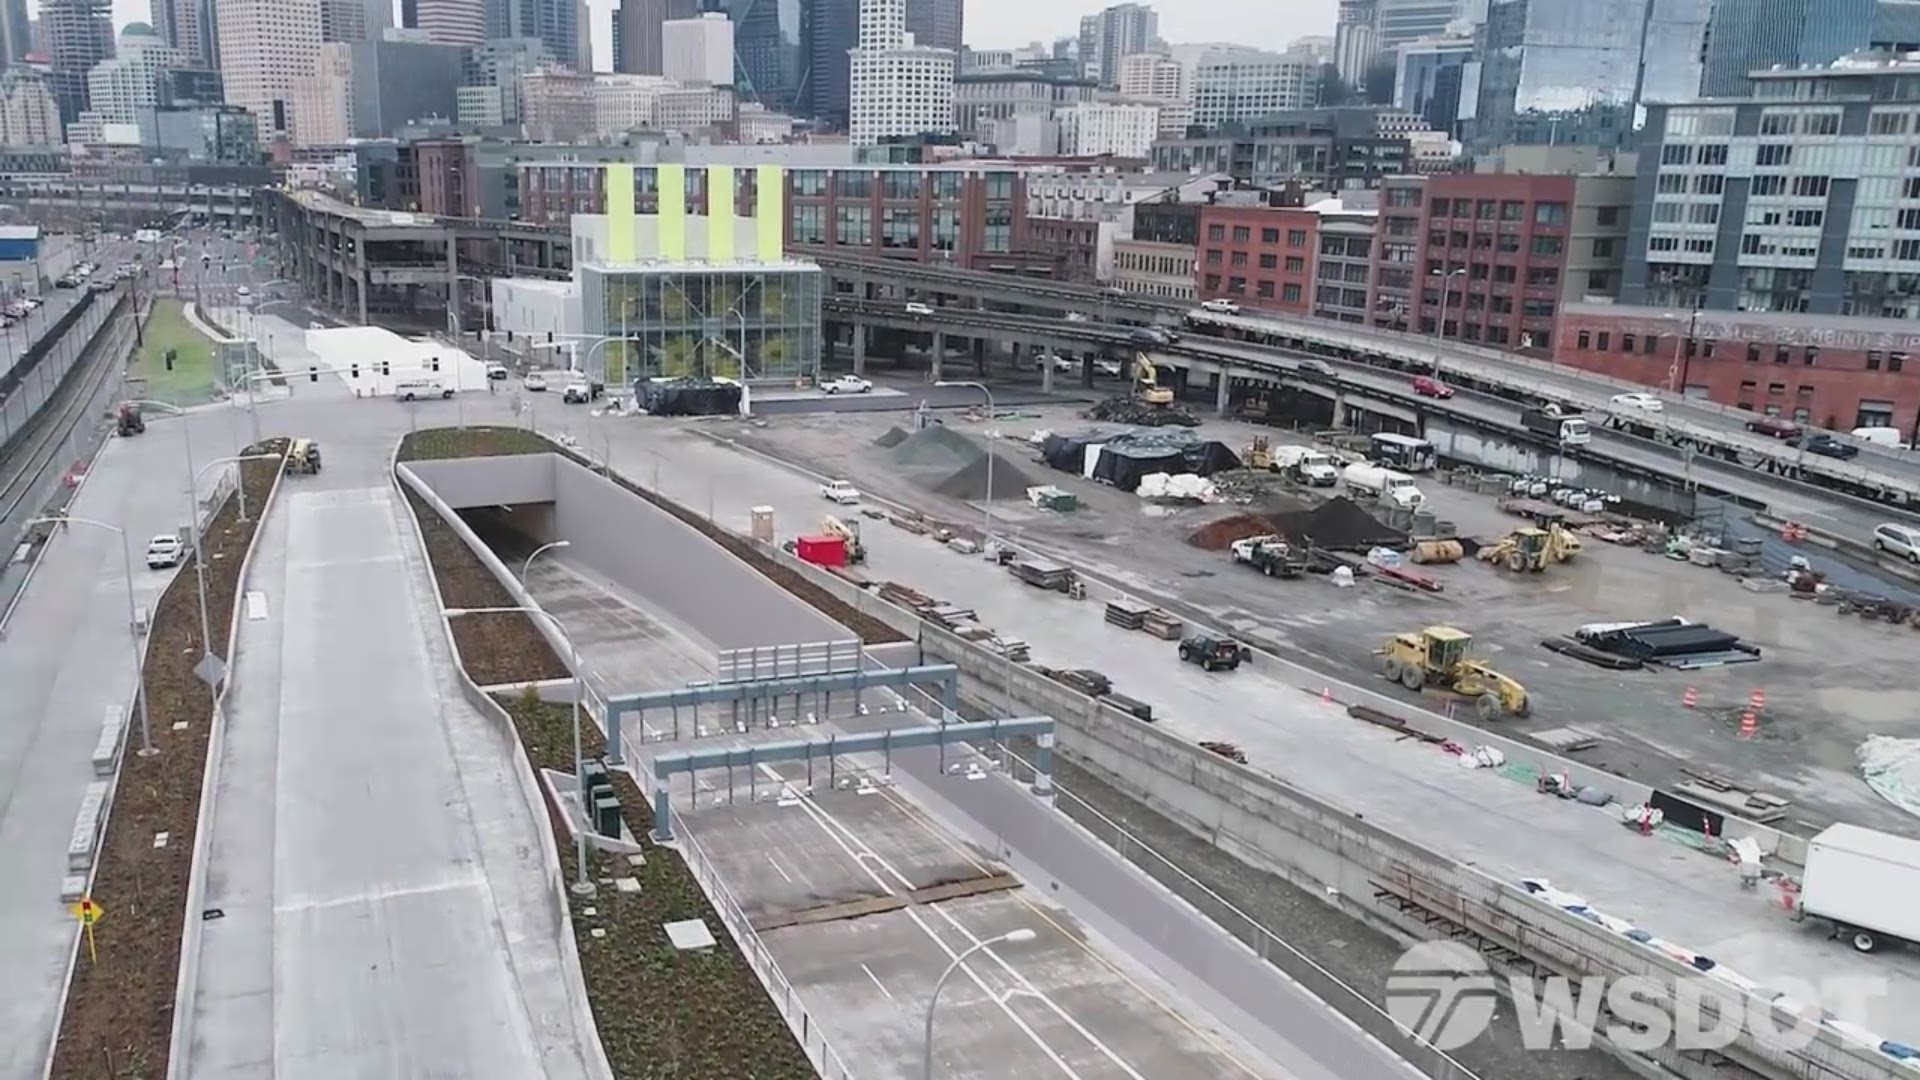 WSDOT released the footage tracking of The Alaskan Way Viaduct as construction crews worked to take down the concrete structure in front of Seattle.